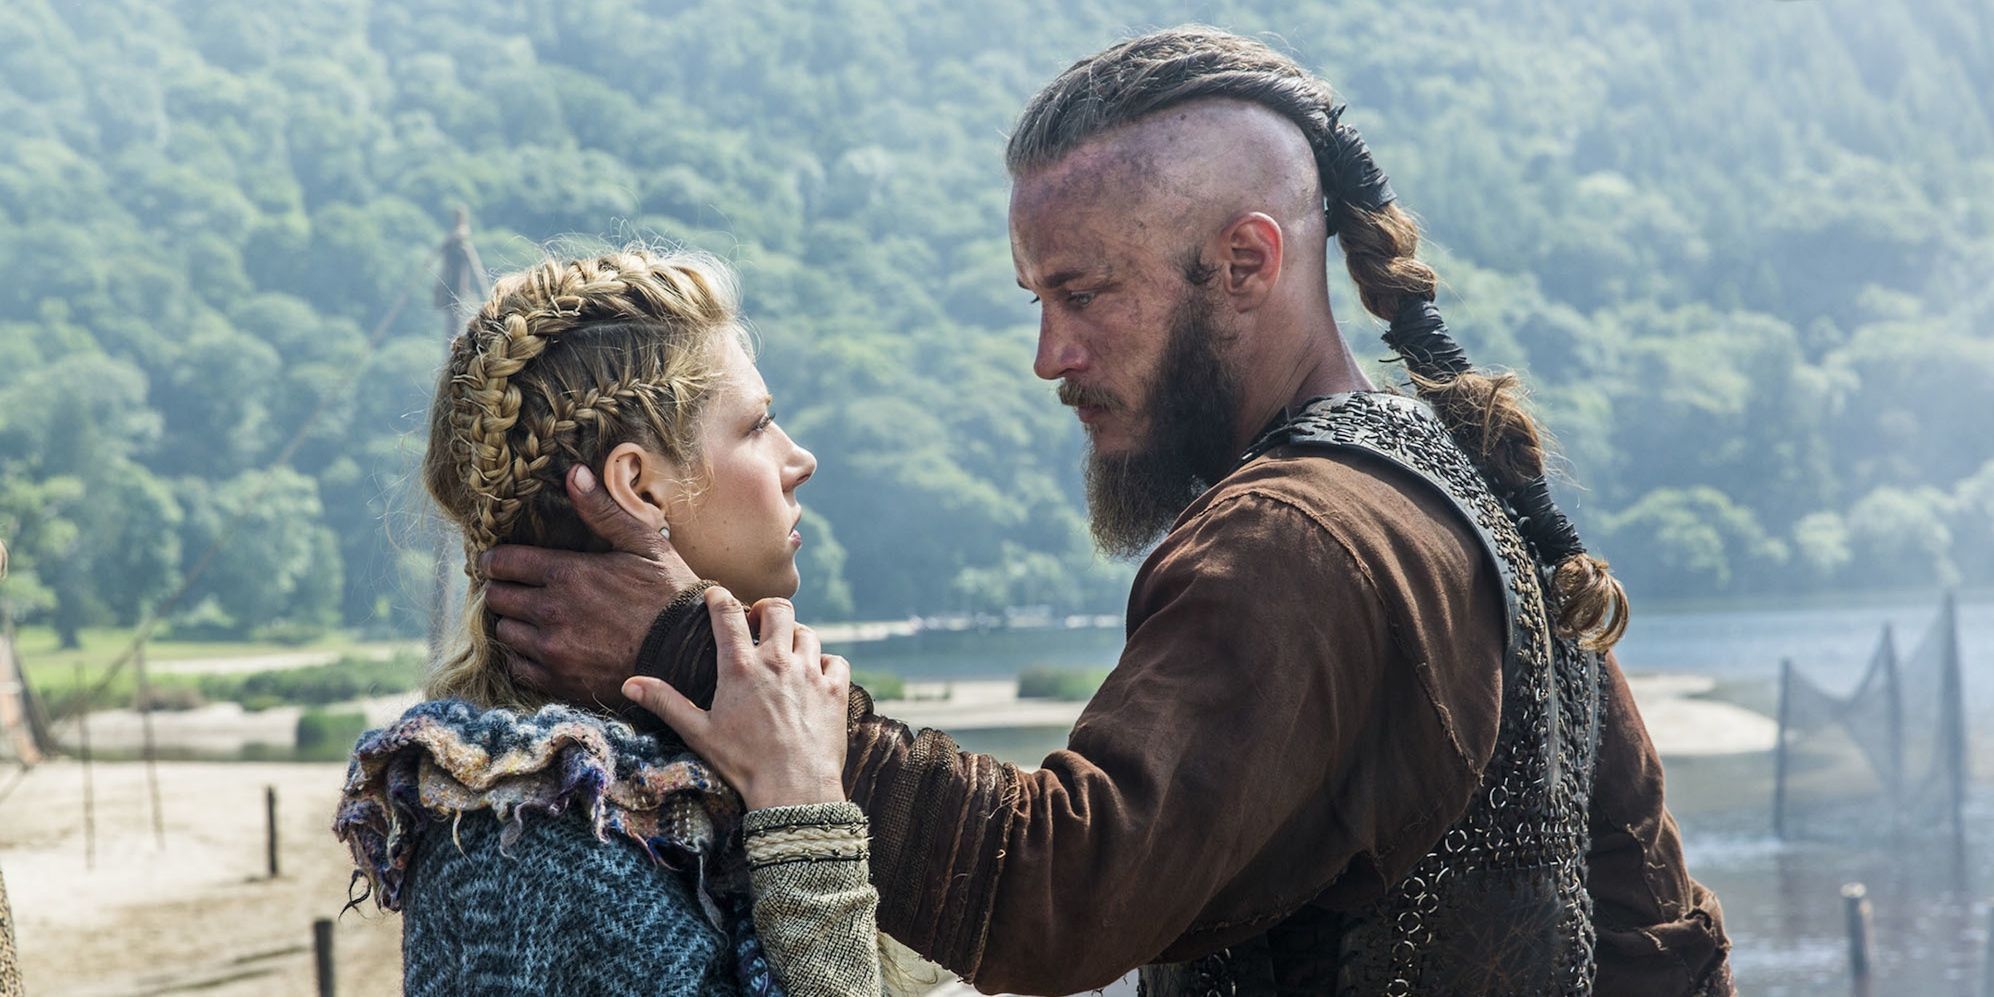 Lagertha and Ragnar embrace before Ragnar left to fight jarl Haraldson